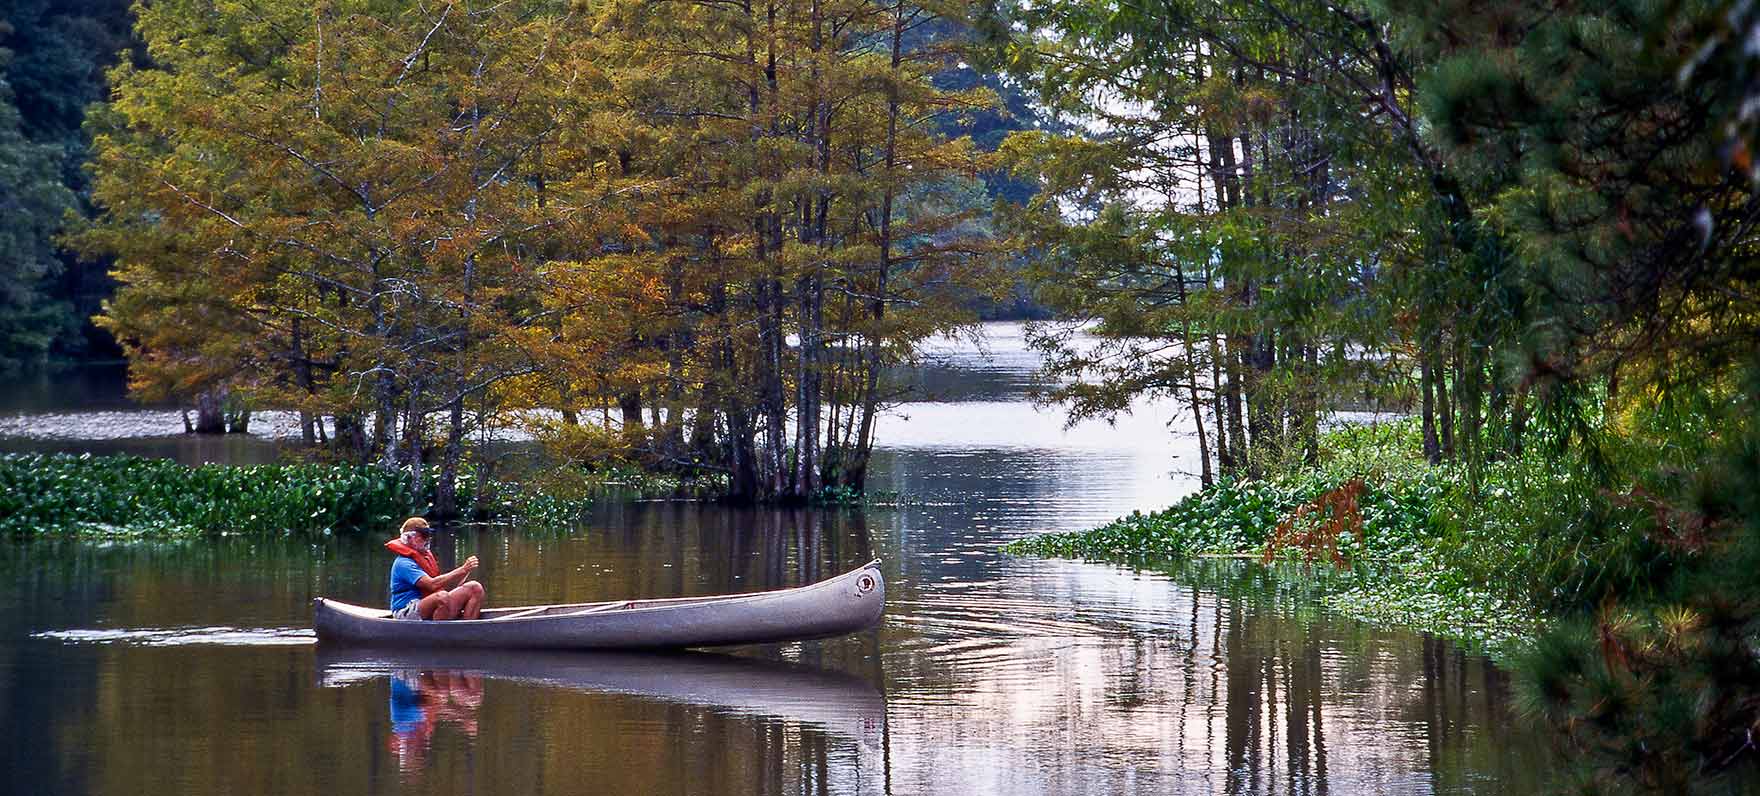 Canoe ride on the quiet waters at Martin Dies, Jr. State Park in Texas